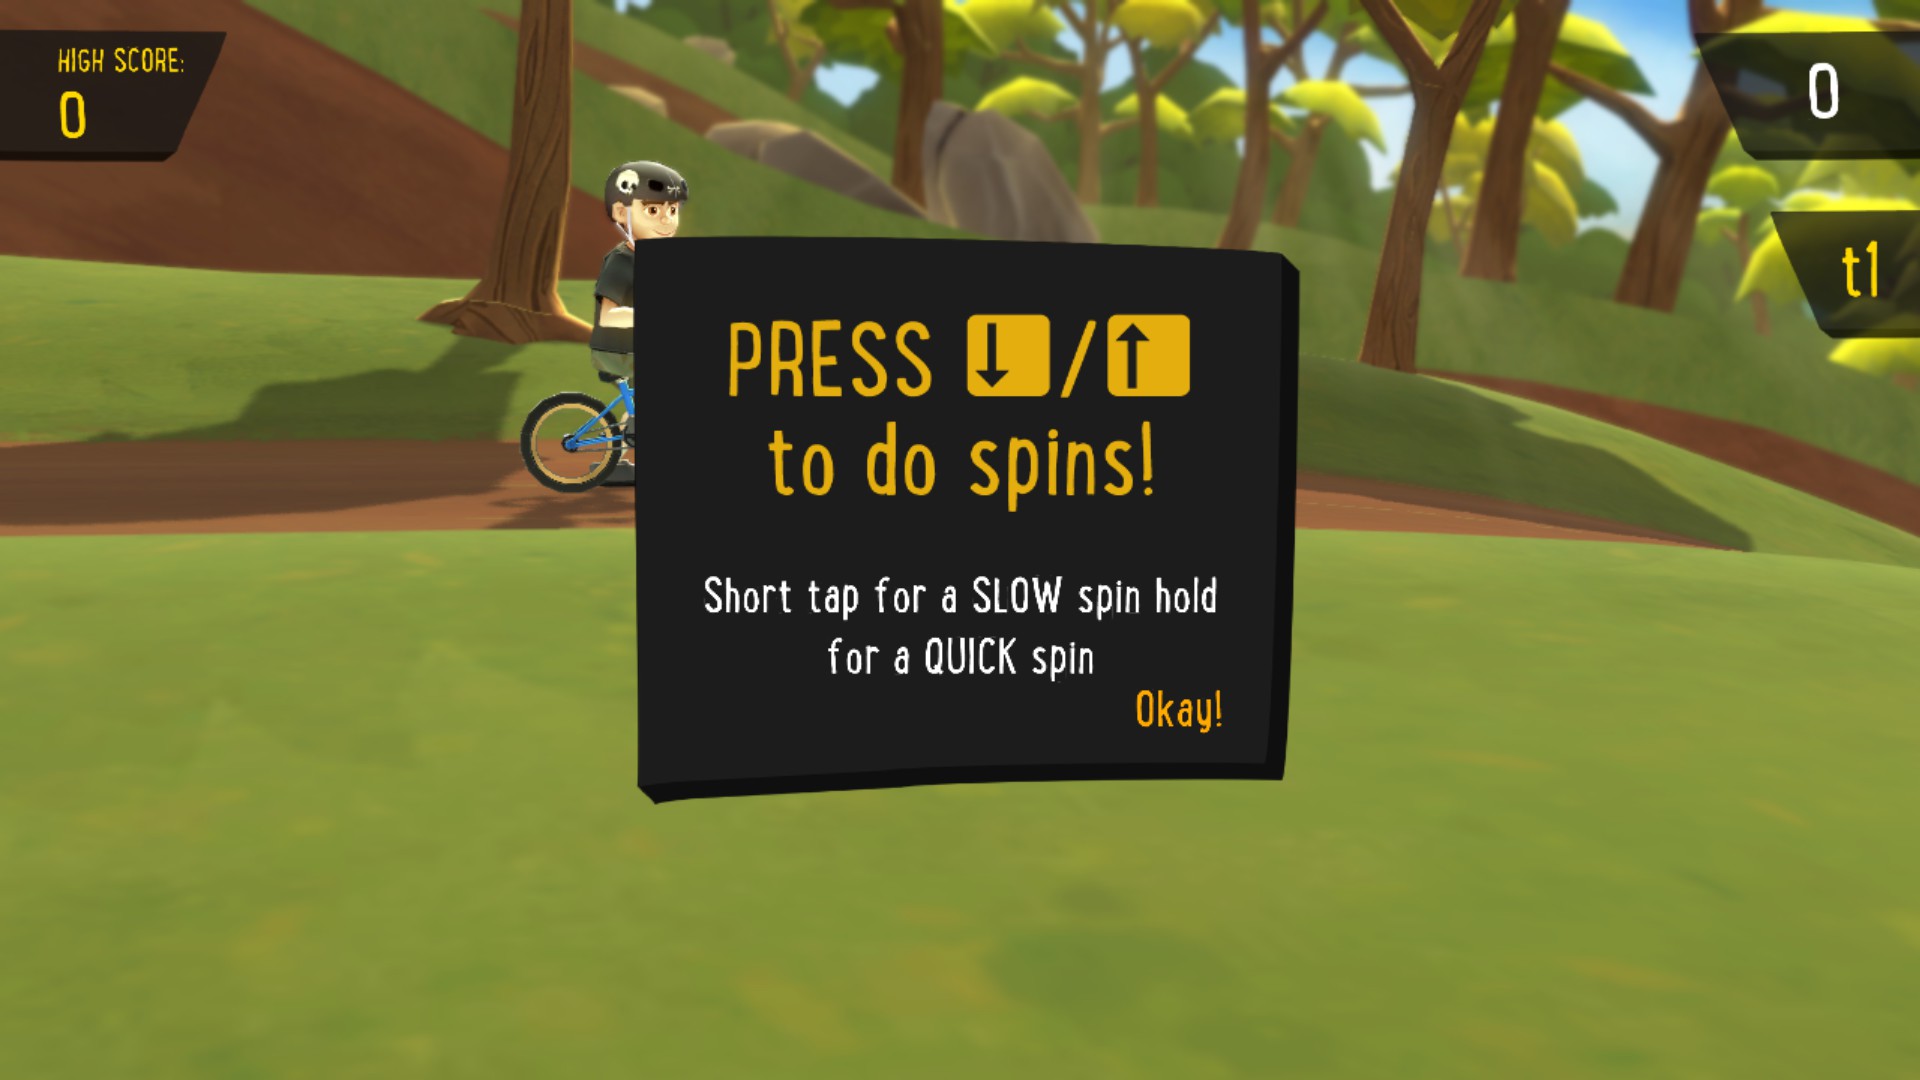 Pumped BMX + - List of all tricks and how to get speed - Spins